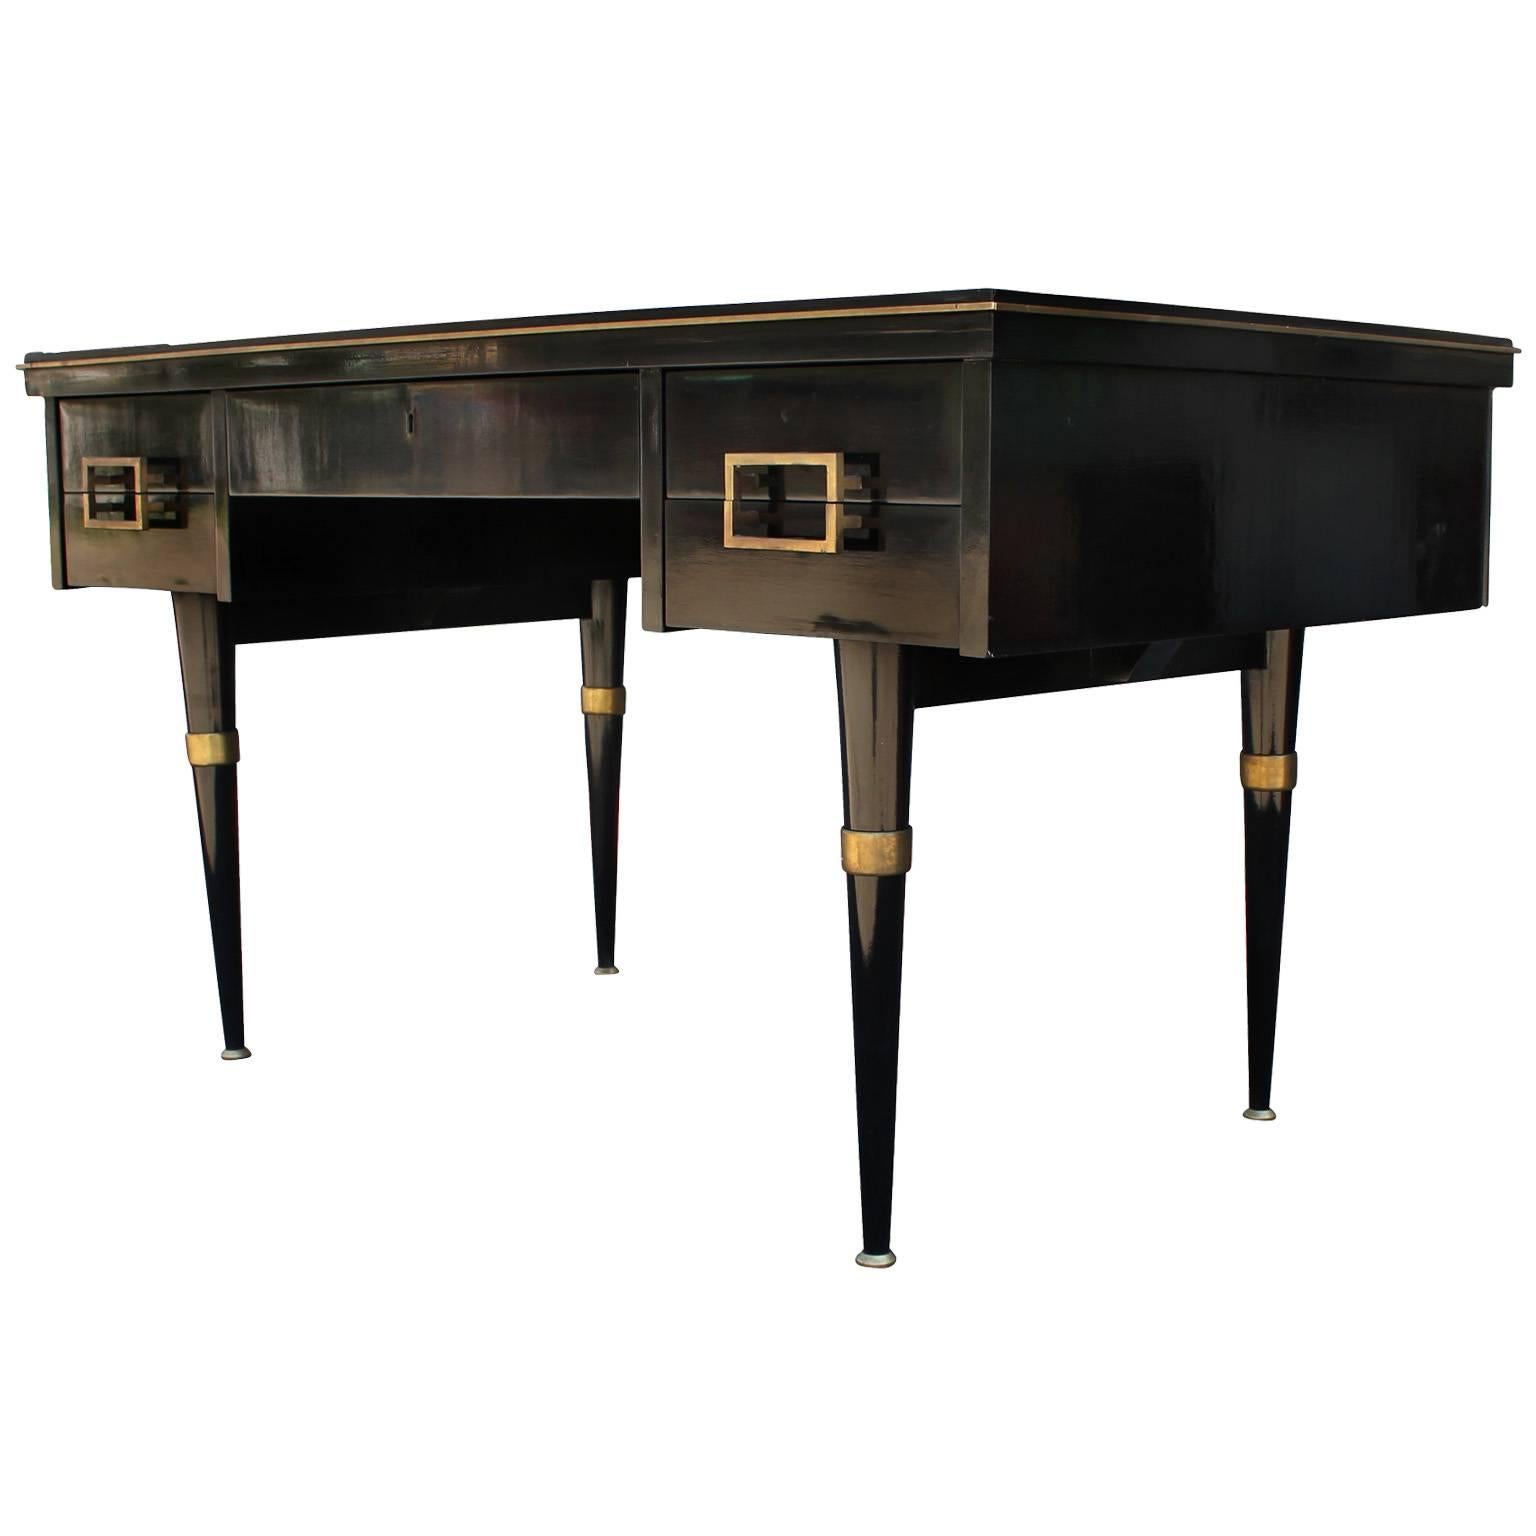 Argentine Modern Black Lacquer Executive Desk with Brass Accents and Green Writing Surface